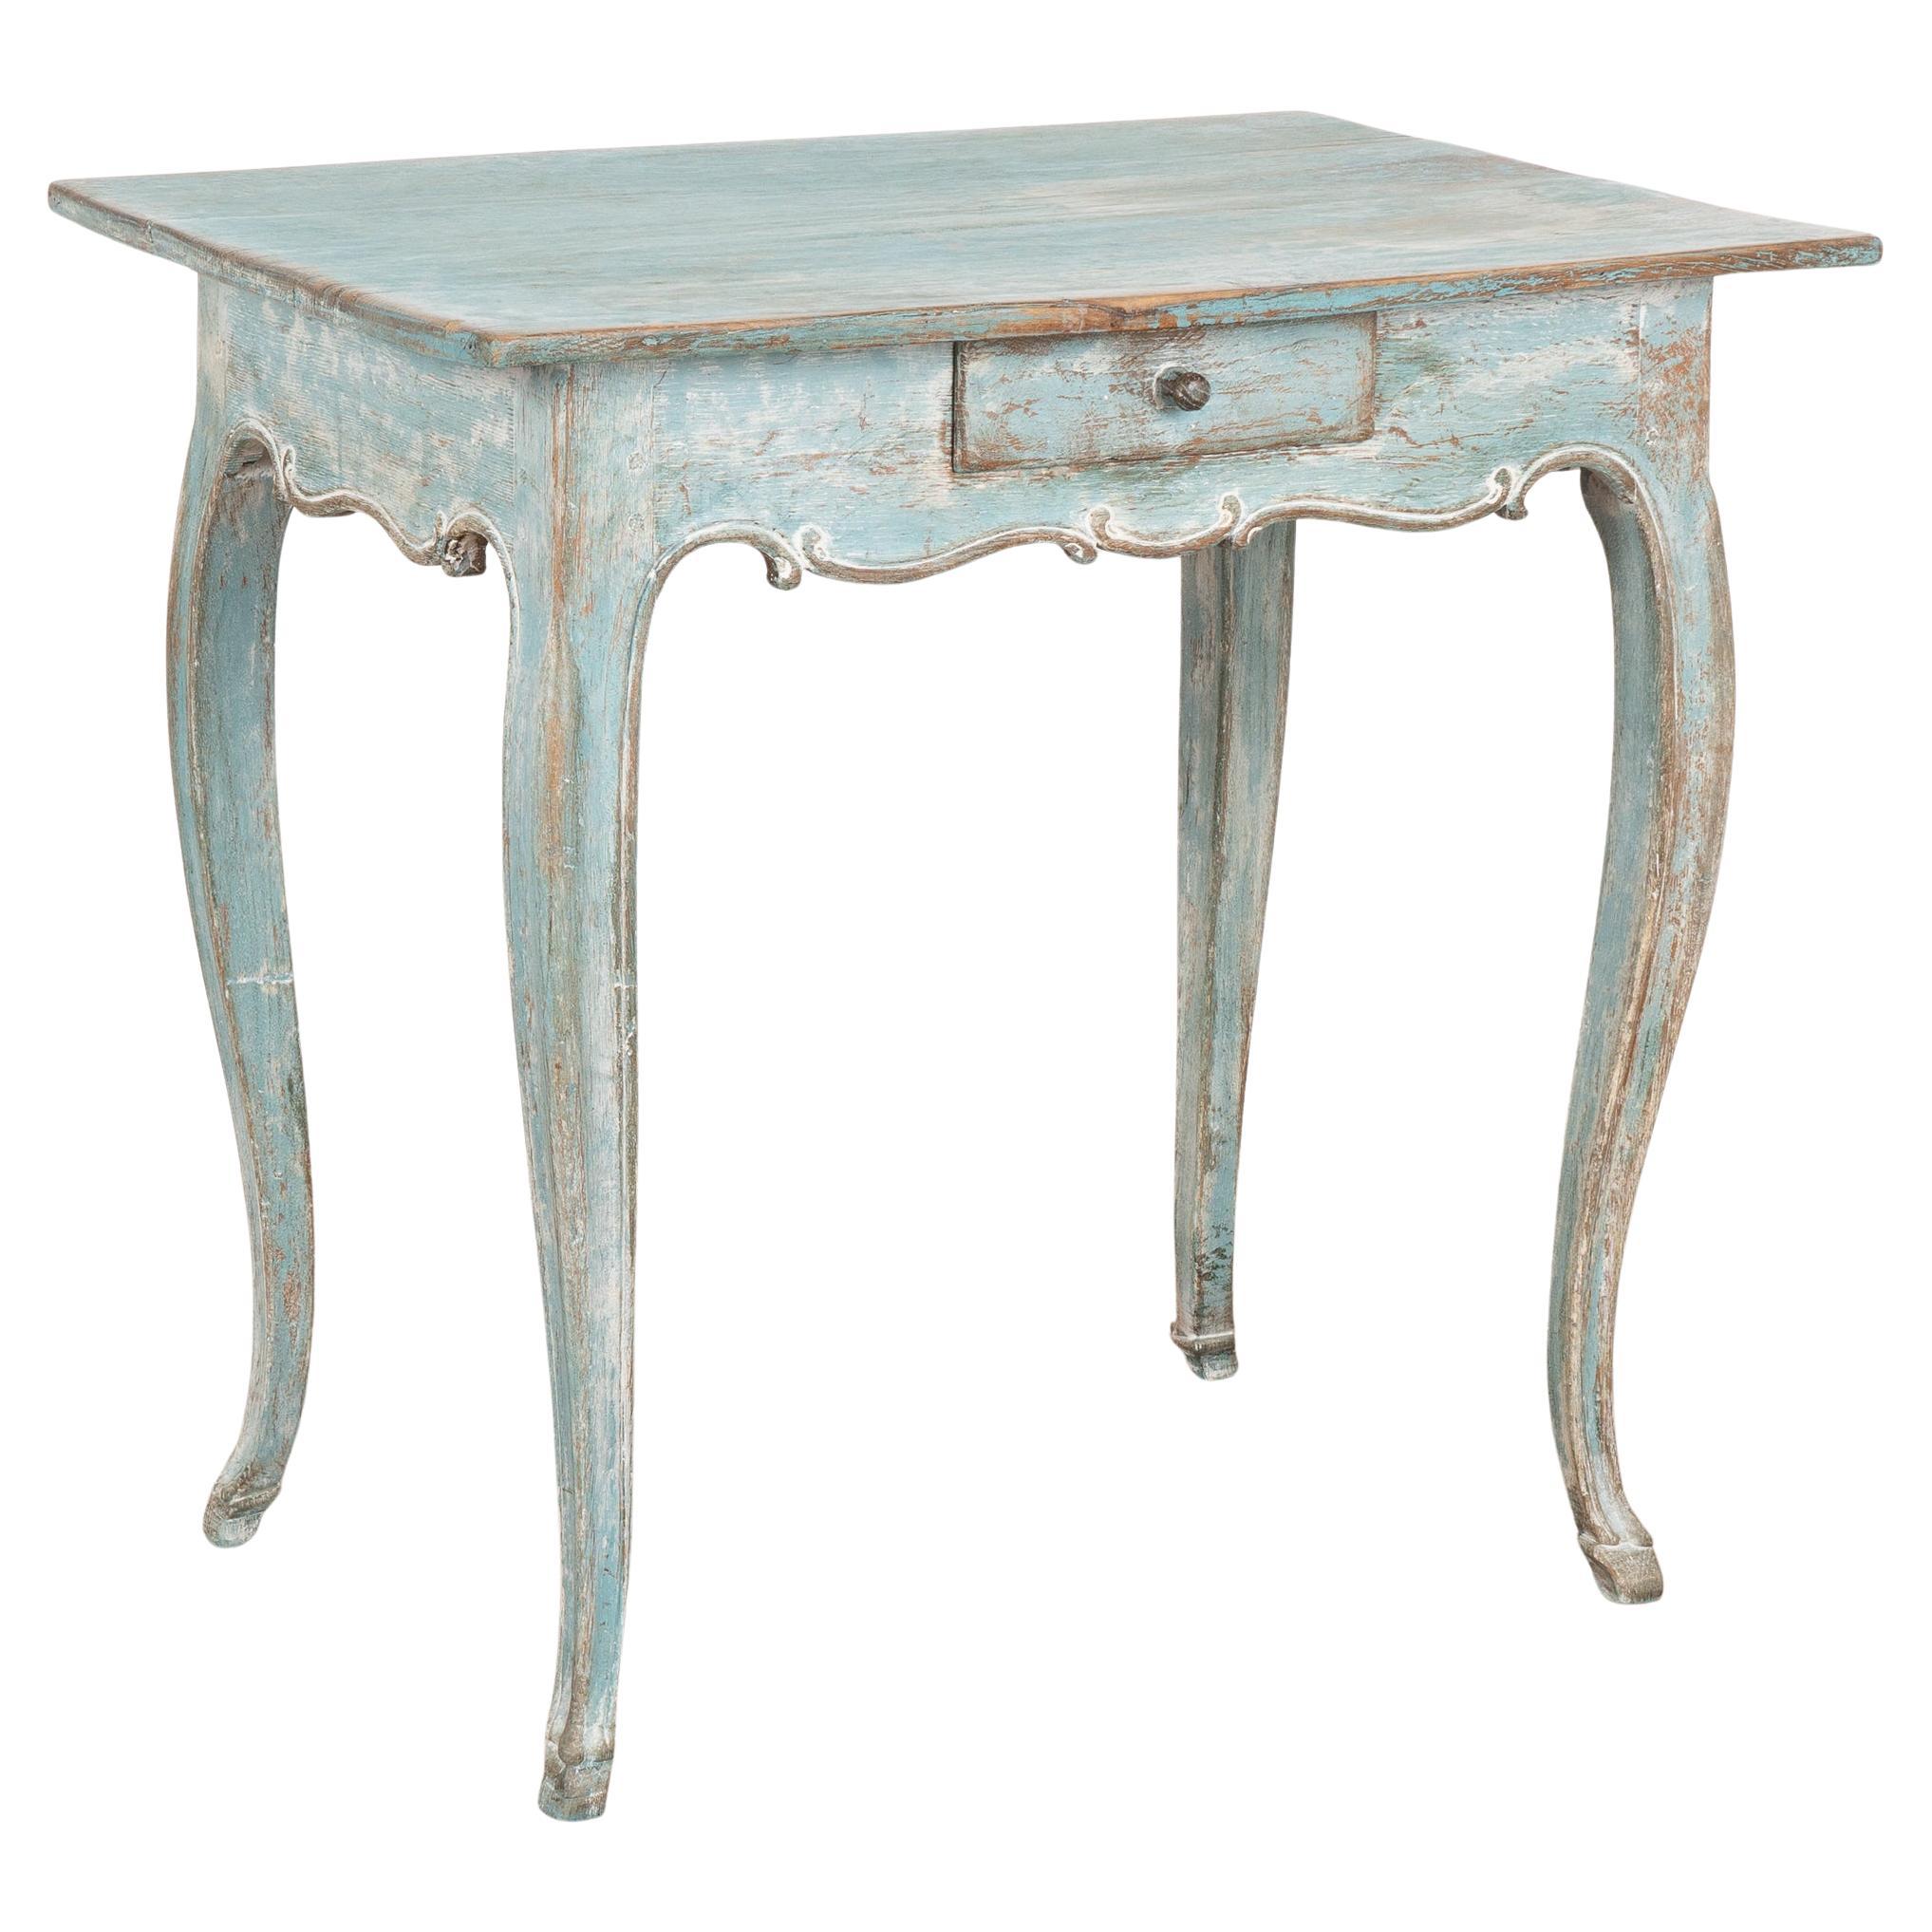 Blue Painted Swedish Side Table With Cabriolet Legs, circa 1800